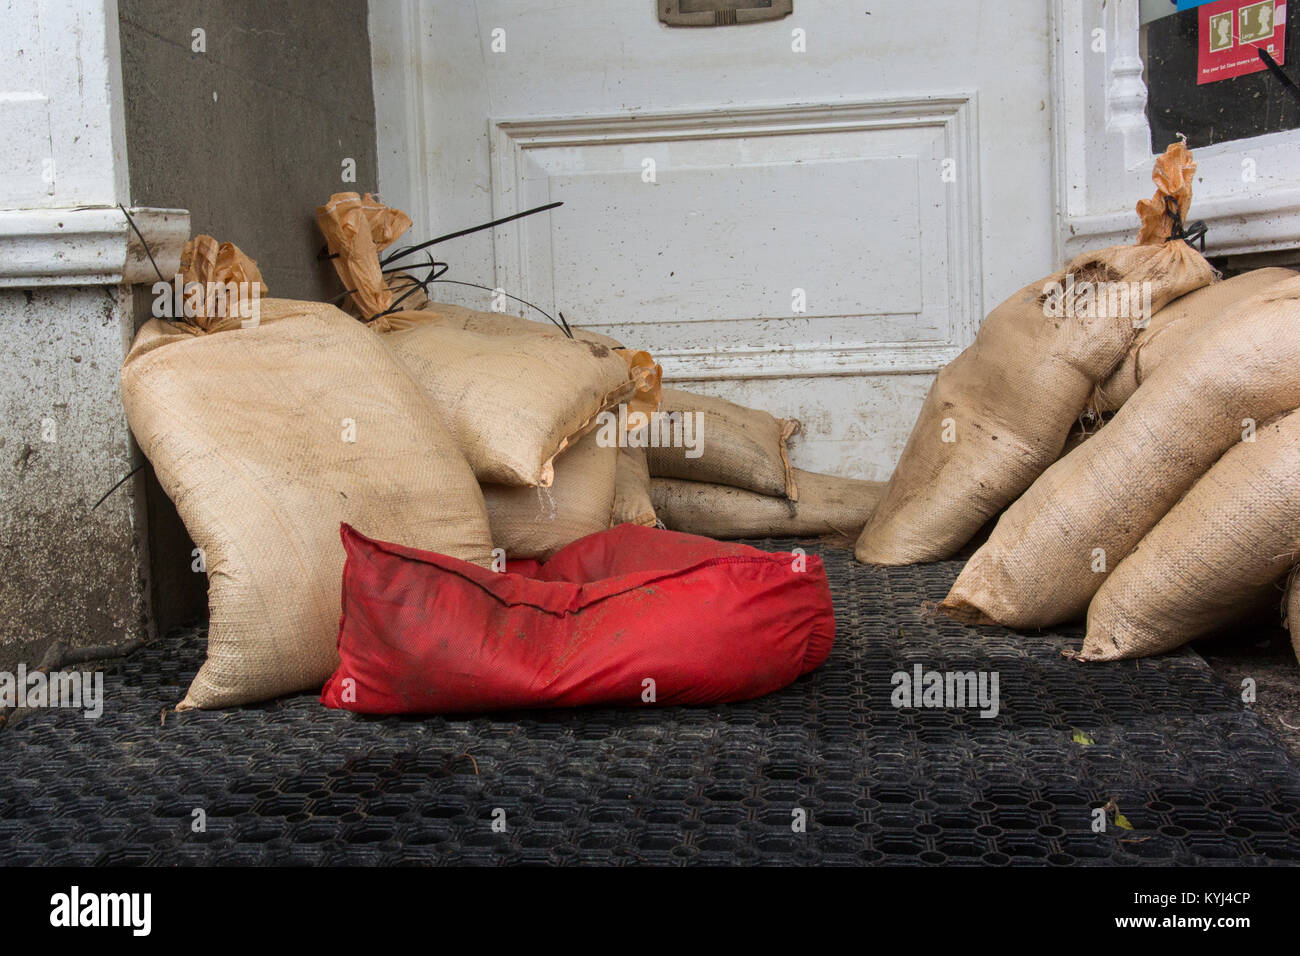 Sandbags outside a doorway to help prevent flooding, Cumbria, UK. Stock Photo